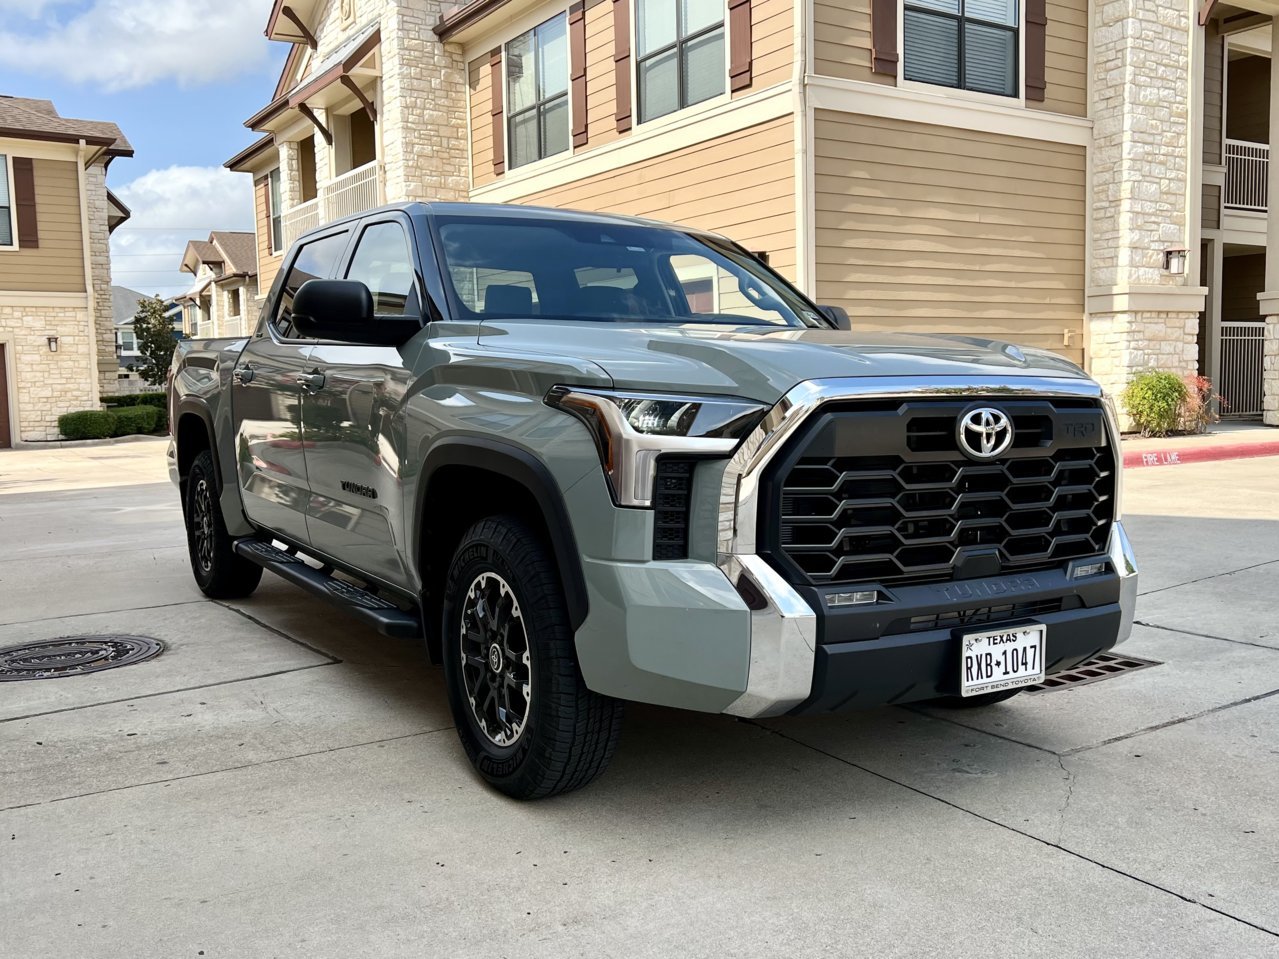 Let’s See Them Lunar Rock Tundras! Toyota Tundra Forum